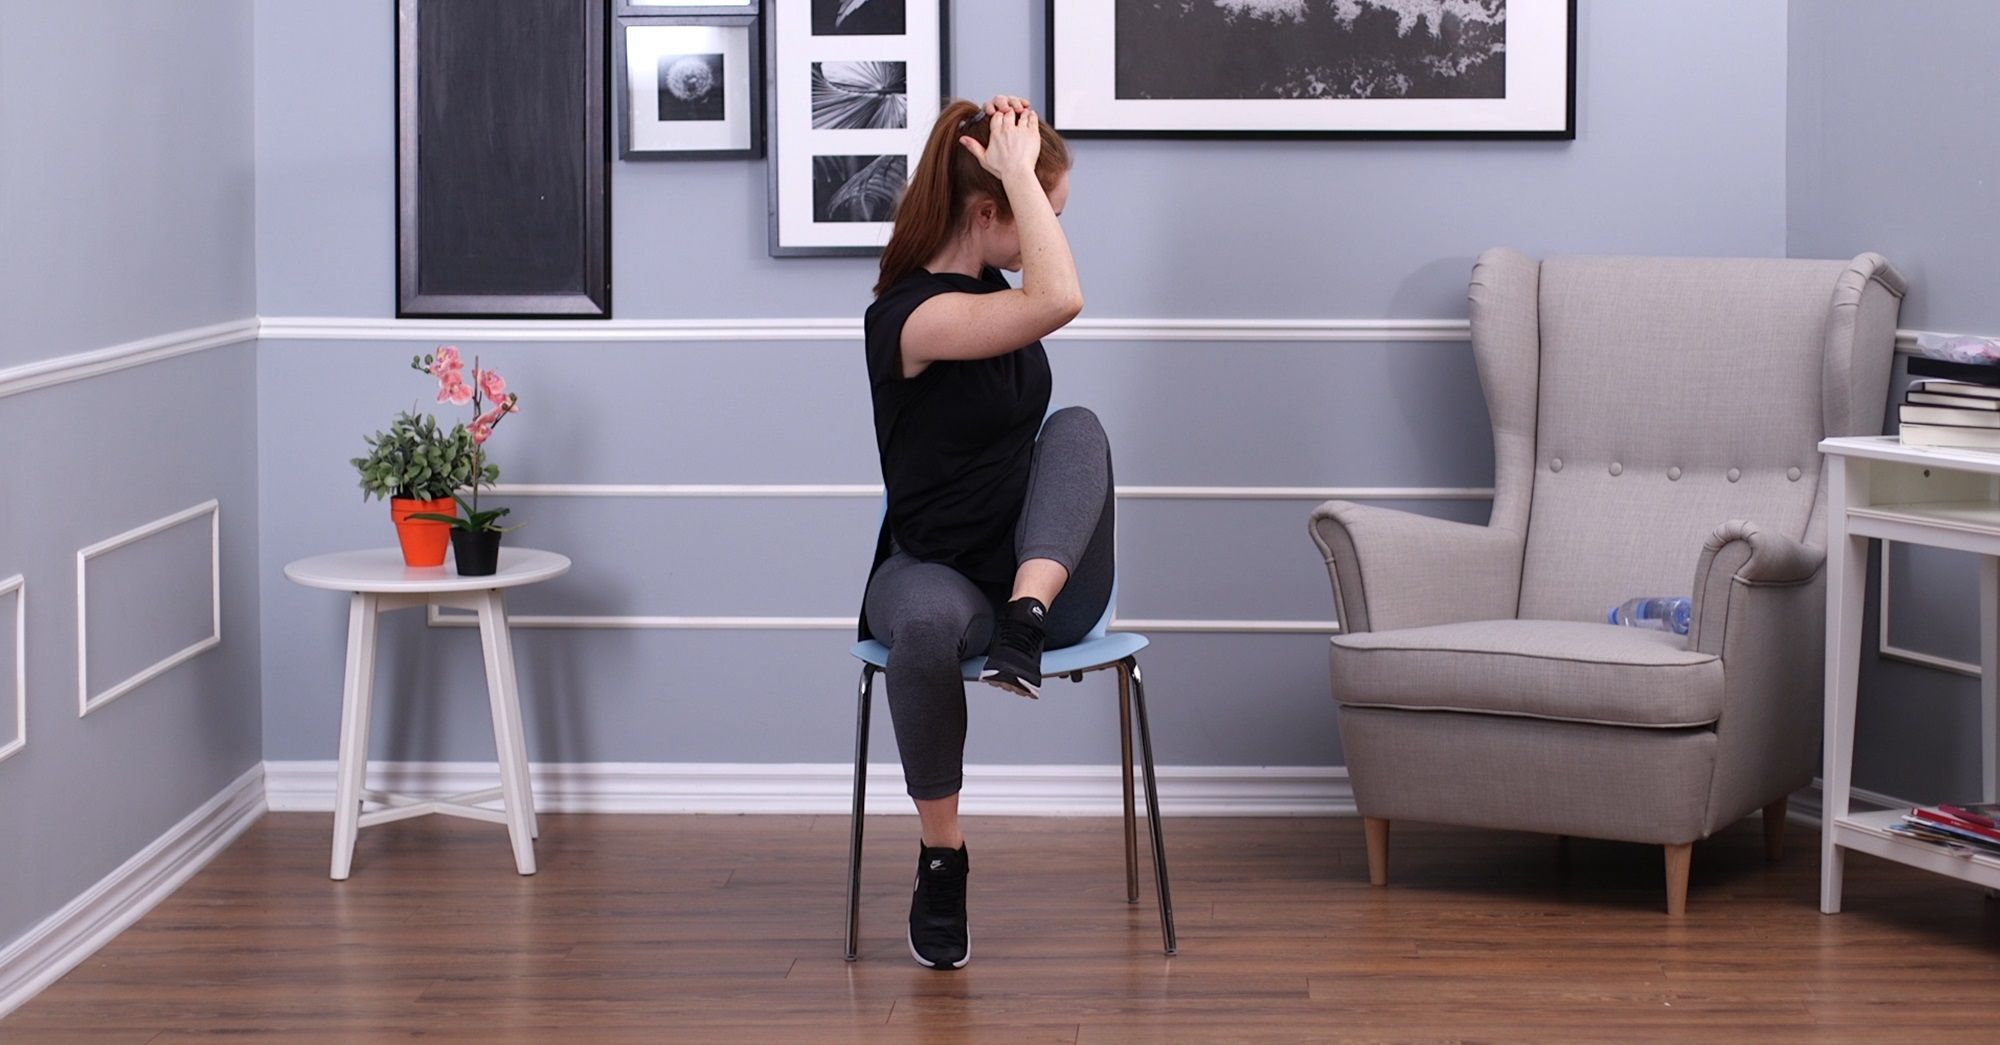 A Chair Yoga Sequence for Arthritis: Increase Mobility and Decrease Pain -  YogaUOnline